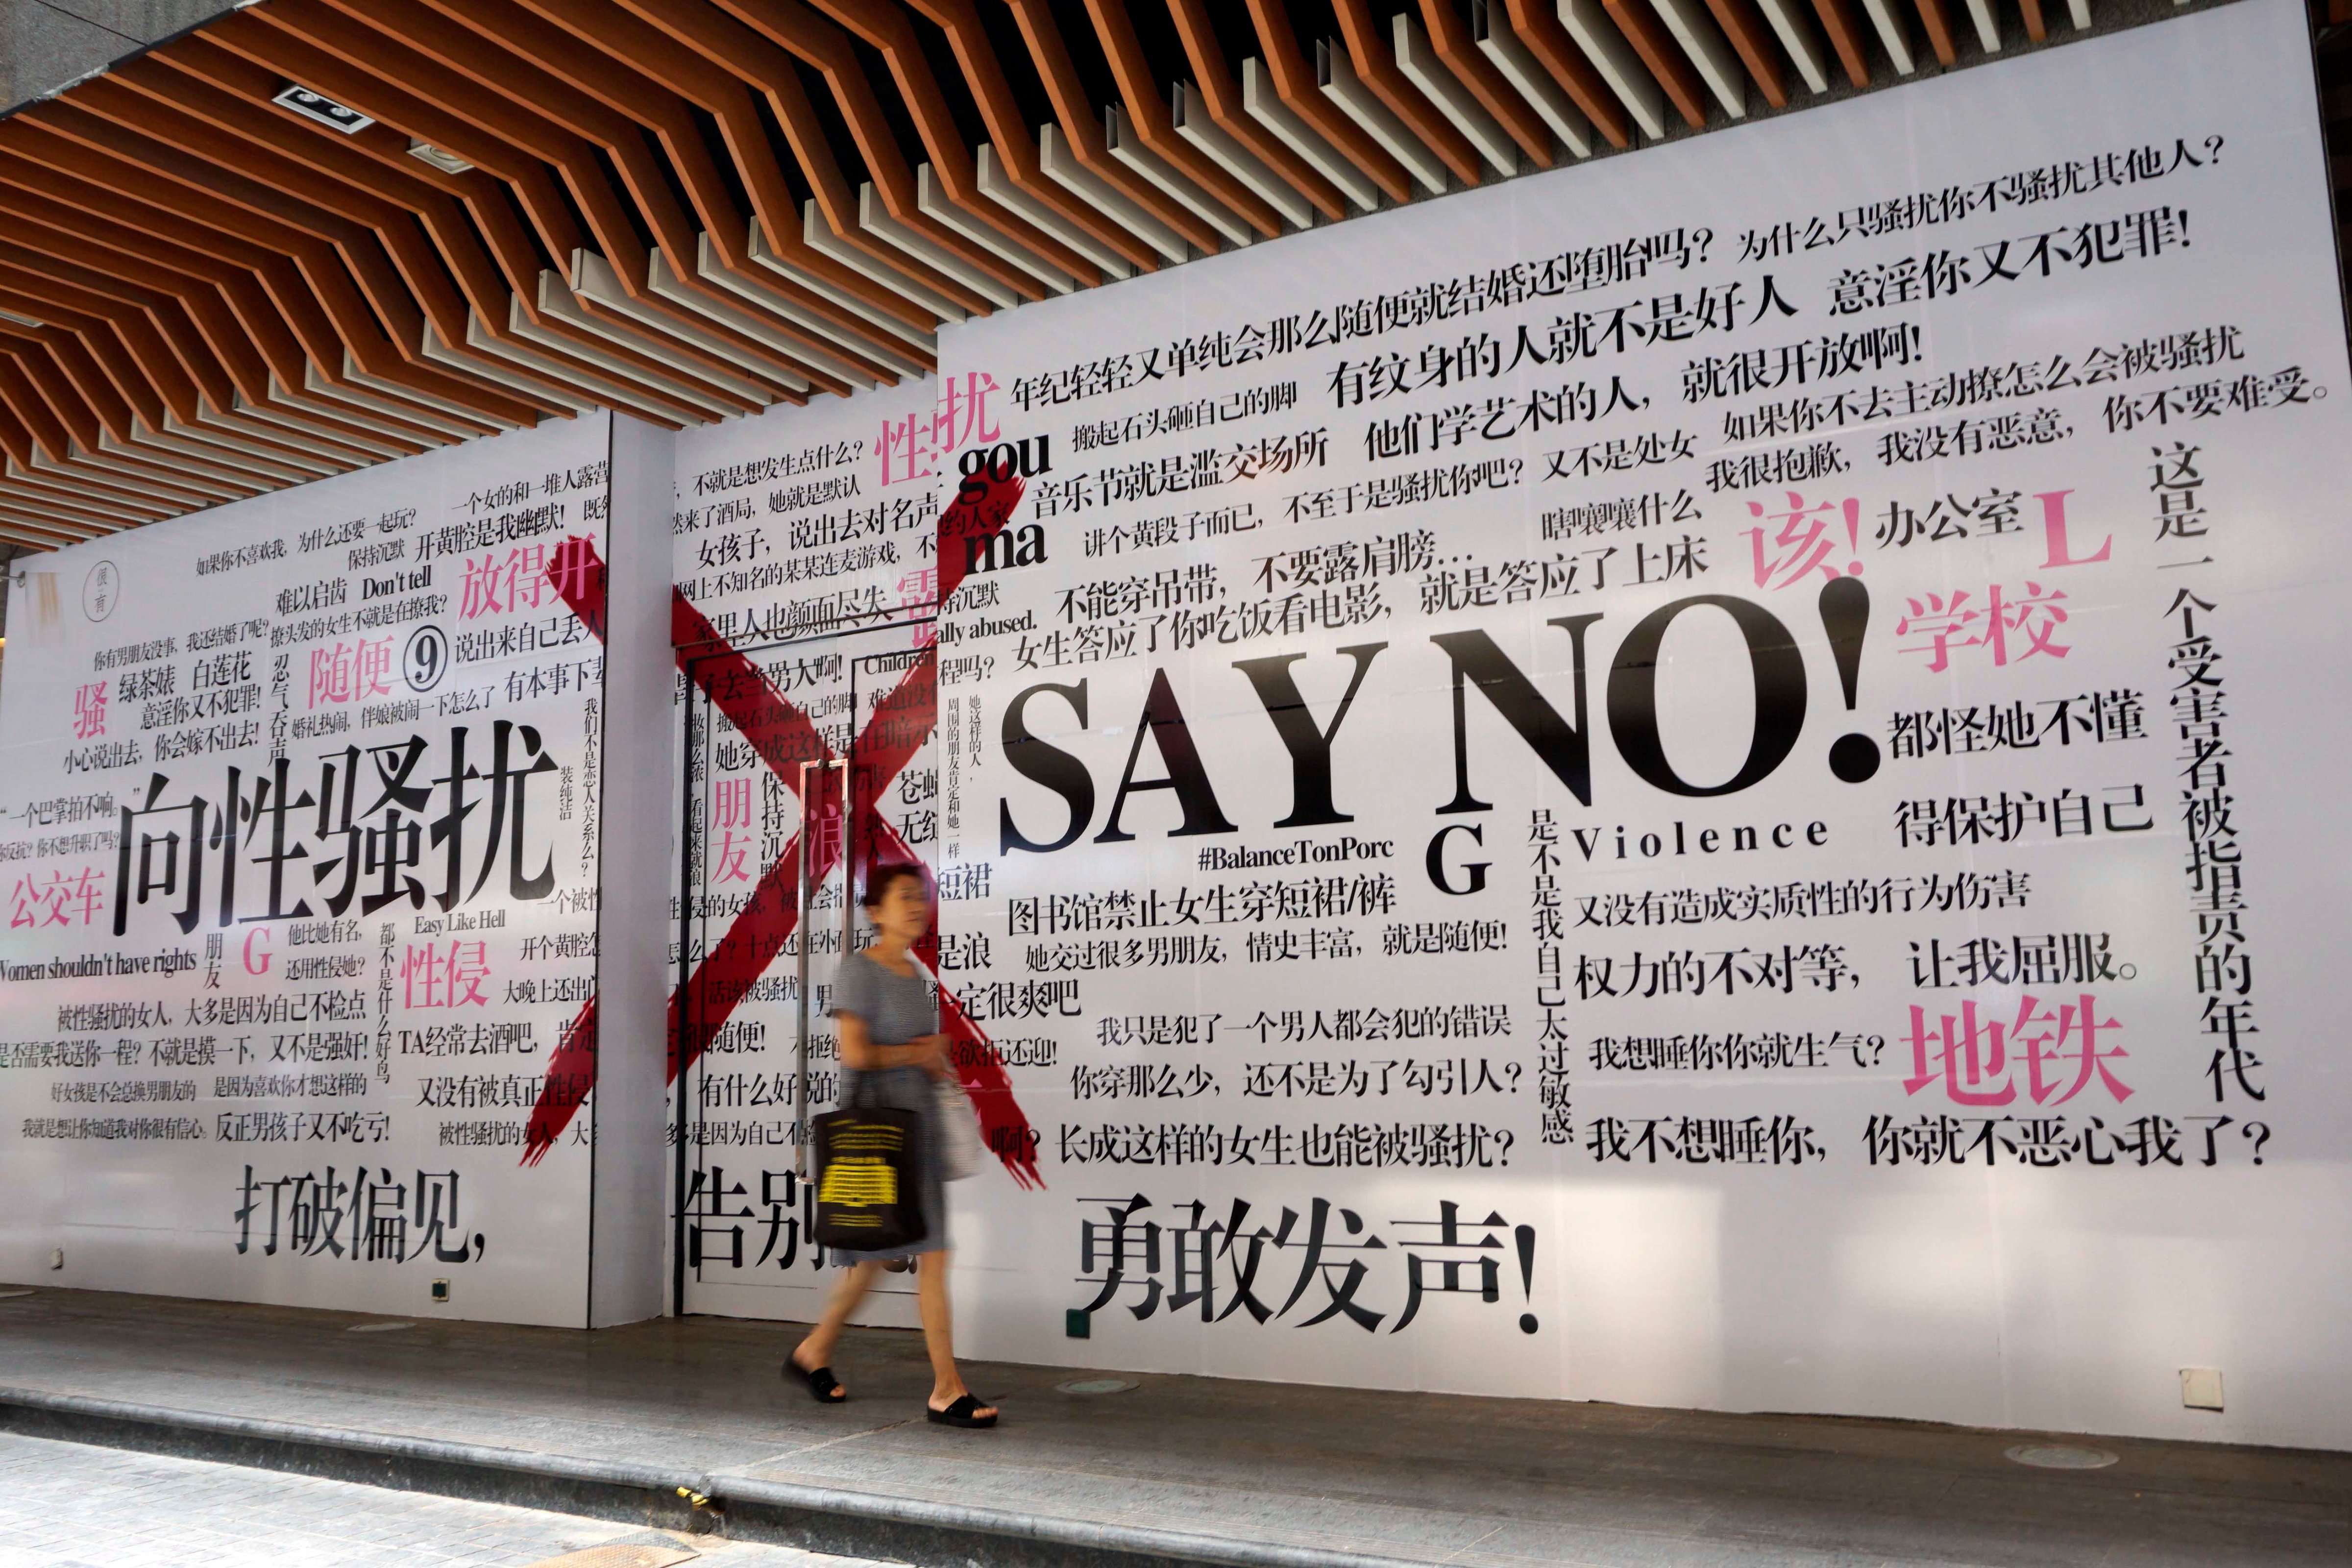 A woman walks past a poster that reads 'say no to sexual harassment' in Xi'an, Shaanxi Province of China on Aug. 9, 2018. (Zhao Bin—Hua Shang Daily/VCG/Getty Images)